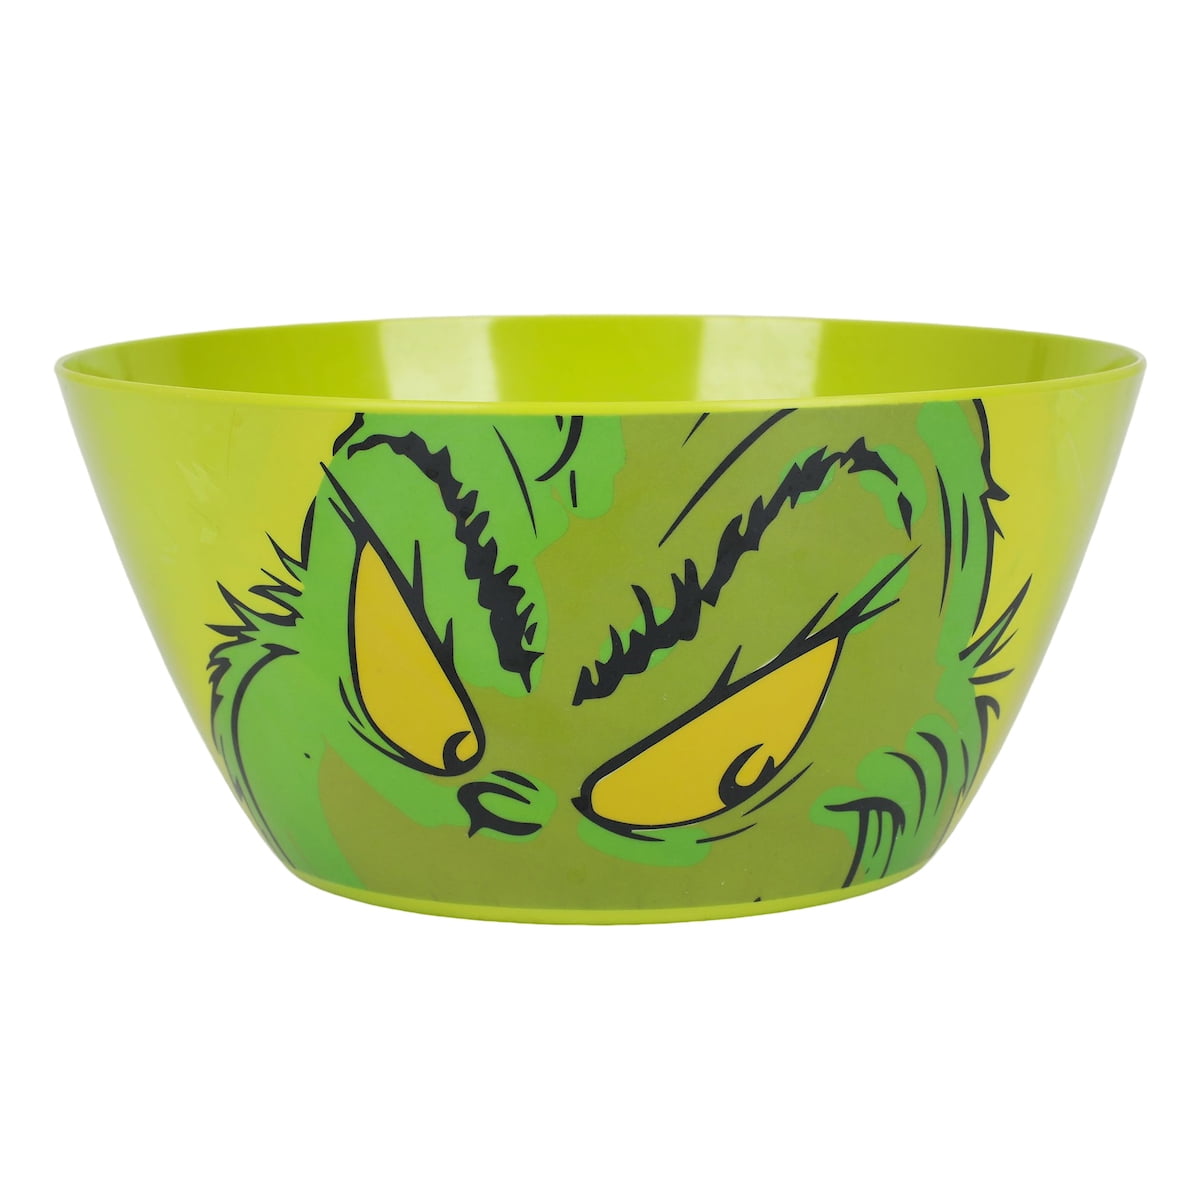 The Grinch™ Cereal Bowls, Set of 4